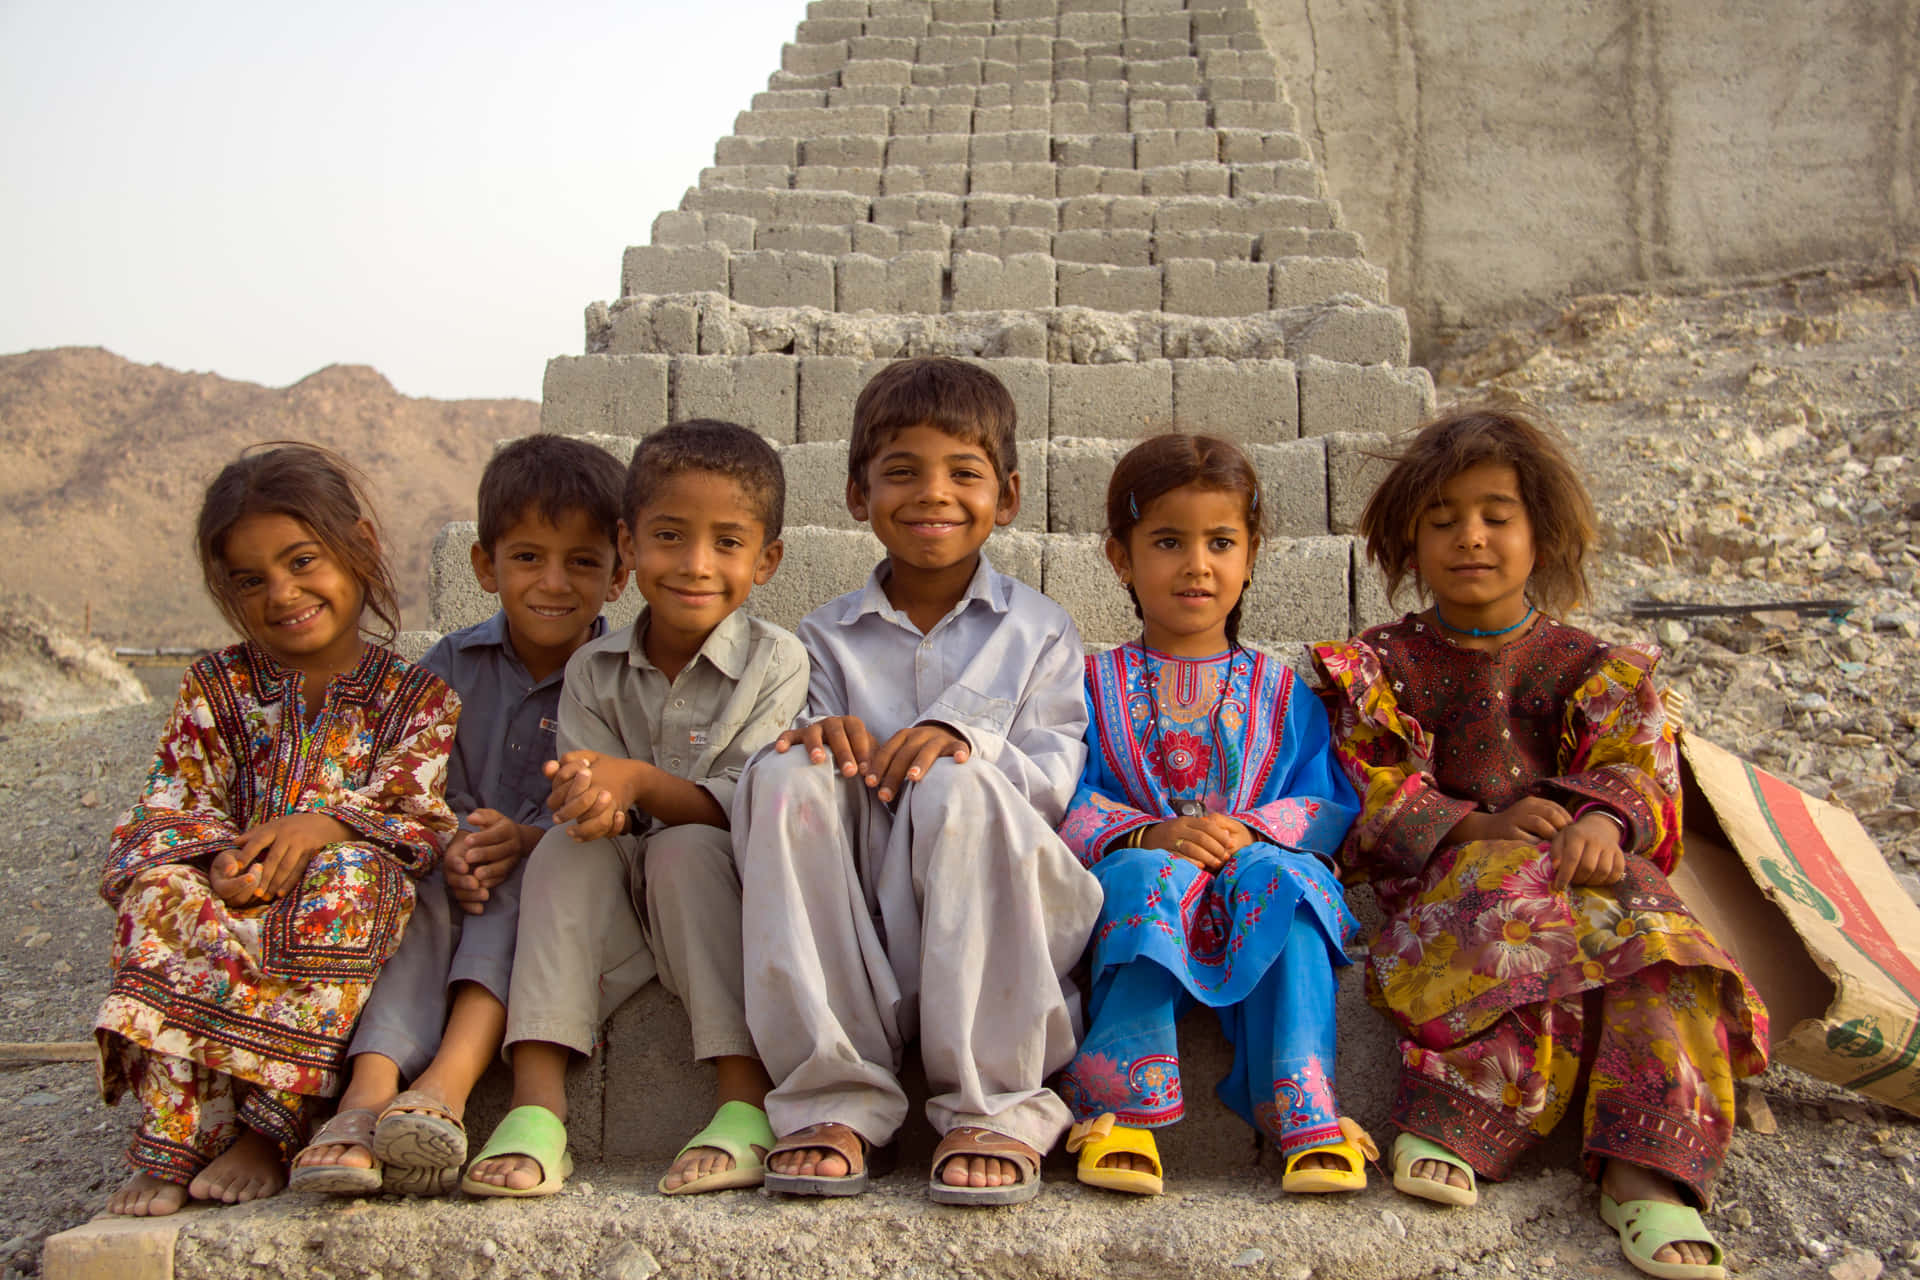 A Group Of Children Sitting On A Pile Of Bricks